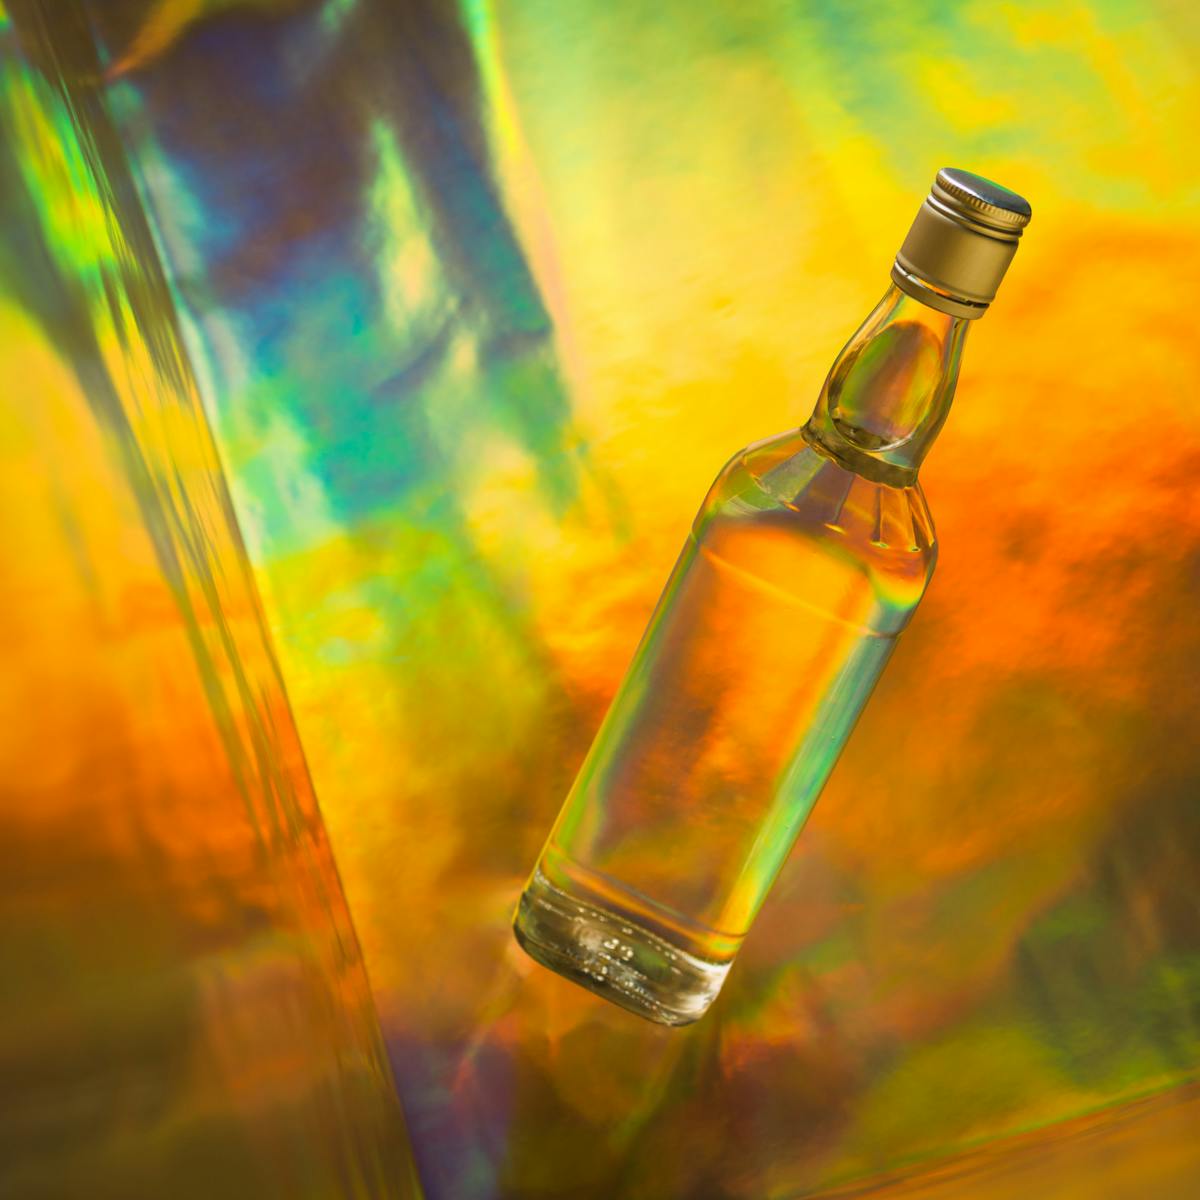 Photograph of an alcoholic spirit bottle on a colourful background.